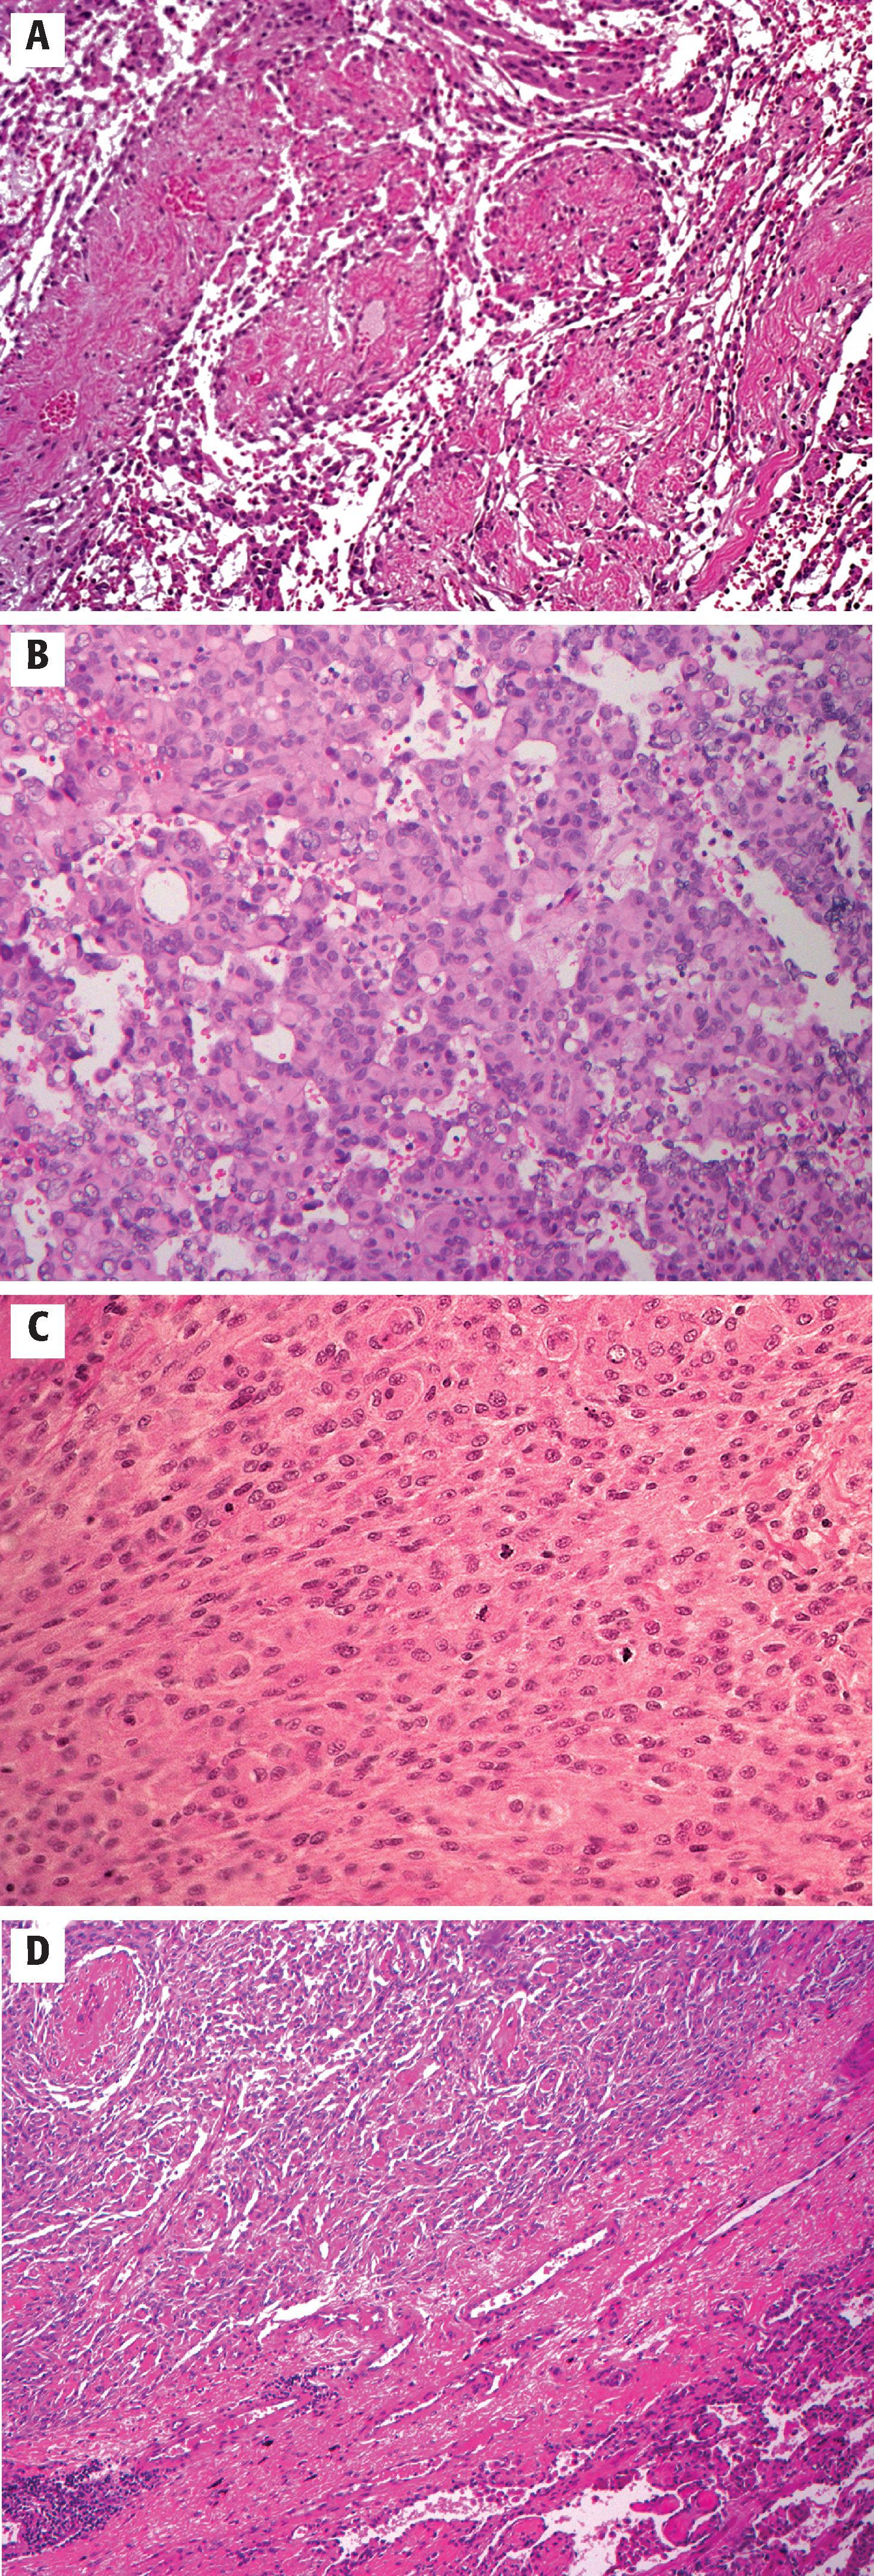 FIGURE 10.3, A, Papillary meningioma (WHO grade 3) marked by a pseudopapillary architectural pattern with meningothelial cells arranged around vascular or fibrovascular cores. B, Rhabdoid meningioma (WHO grade 3) characterized by the presence of large cells with eccentric nuclei and prominent eosinophilic cytoplasmic inclusions resembling cells seen in rhabdoid tumors. C, Anaplastic malignant meningioma (WHO grade 3) characterized by extremely high mitotic activity and malignant cytology. D, Anaplastic meningioma (WHO grade 3) that metastasized to the lung.